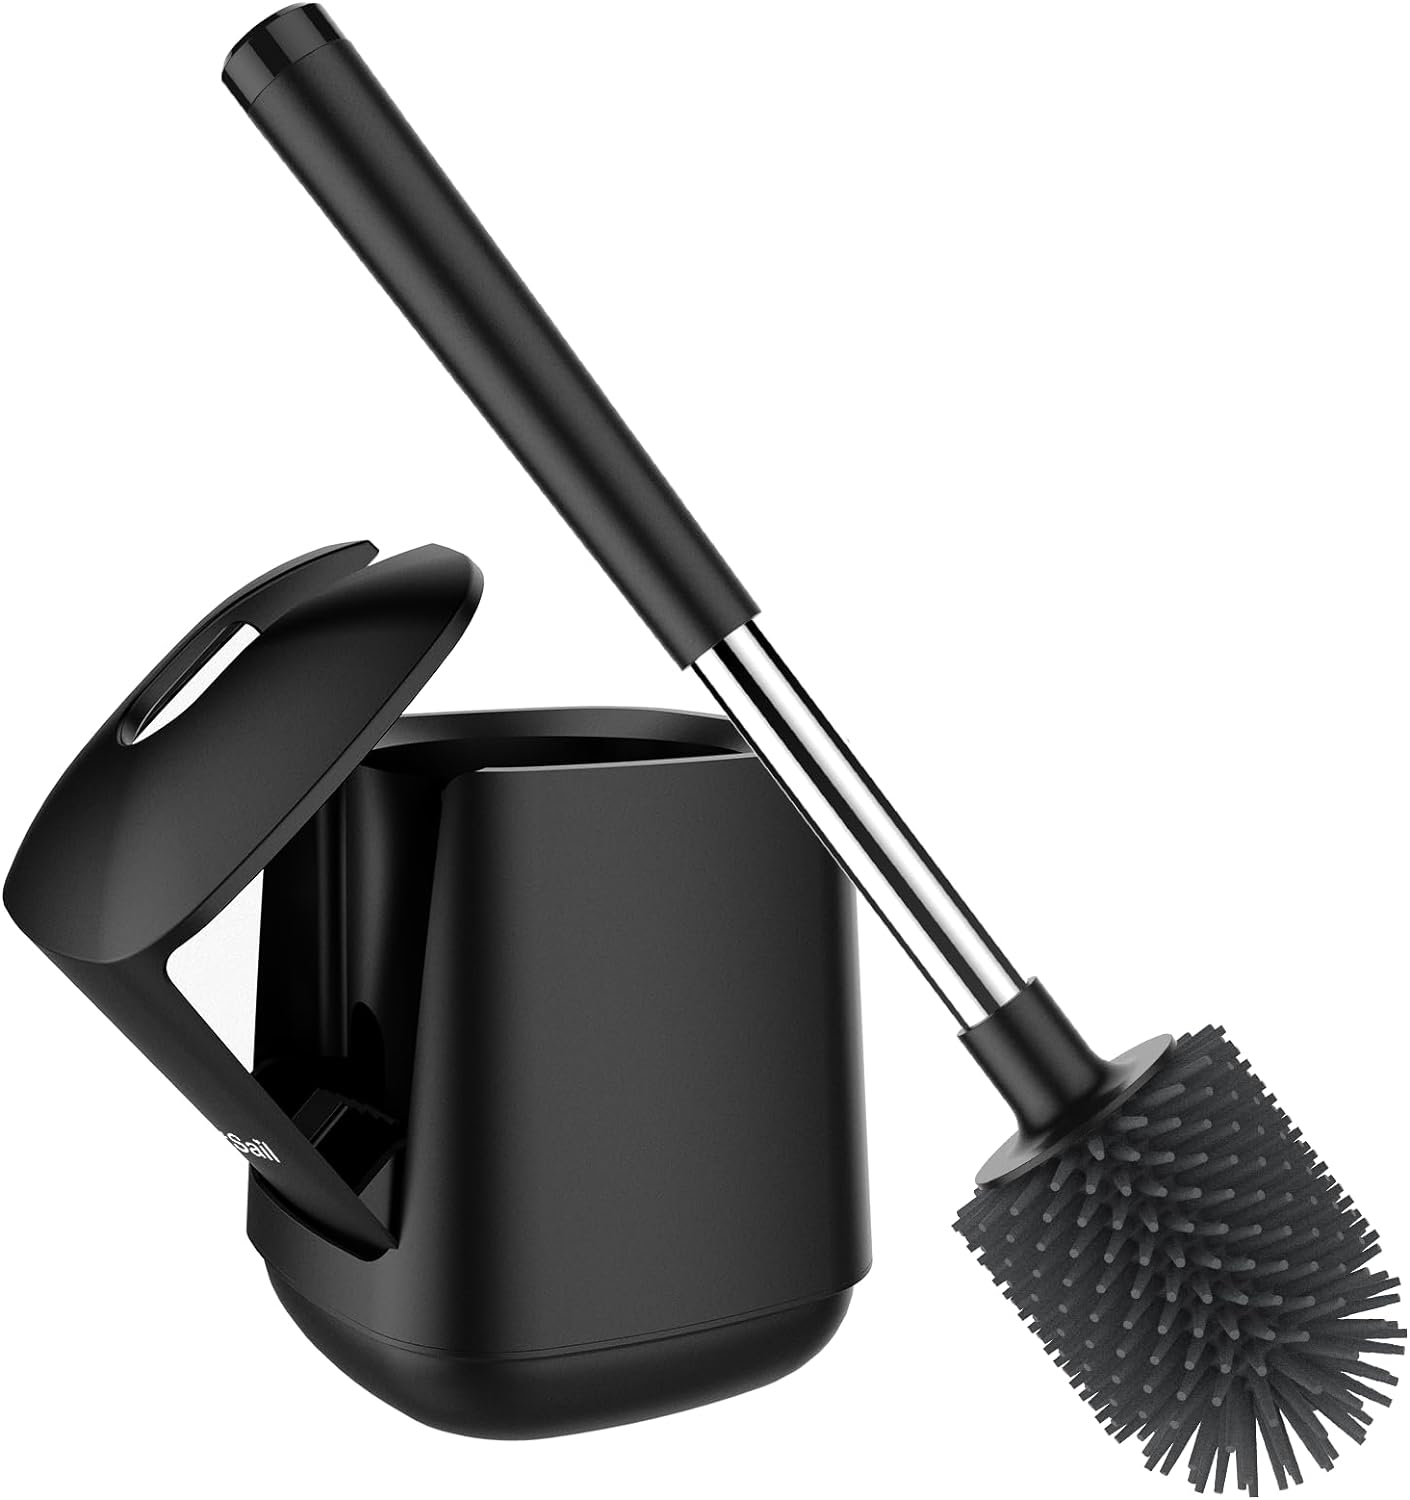 SetSail Silicone Toilet Bowl Brush and Holder Automatic Toilet Brushes for Bathroom with Holder Ventilated Toilet Cleaner Brush for Toilet Scrubber Cleaning - Black